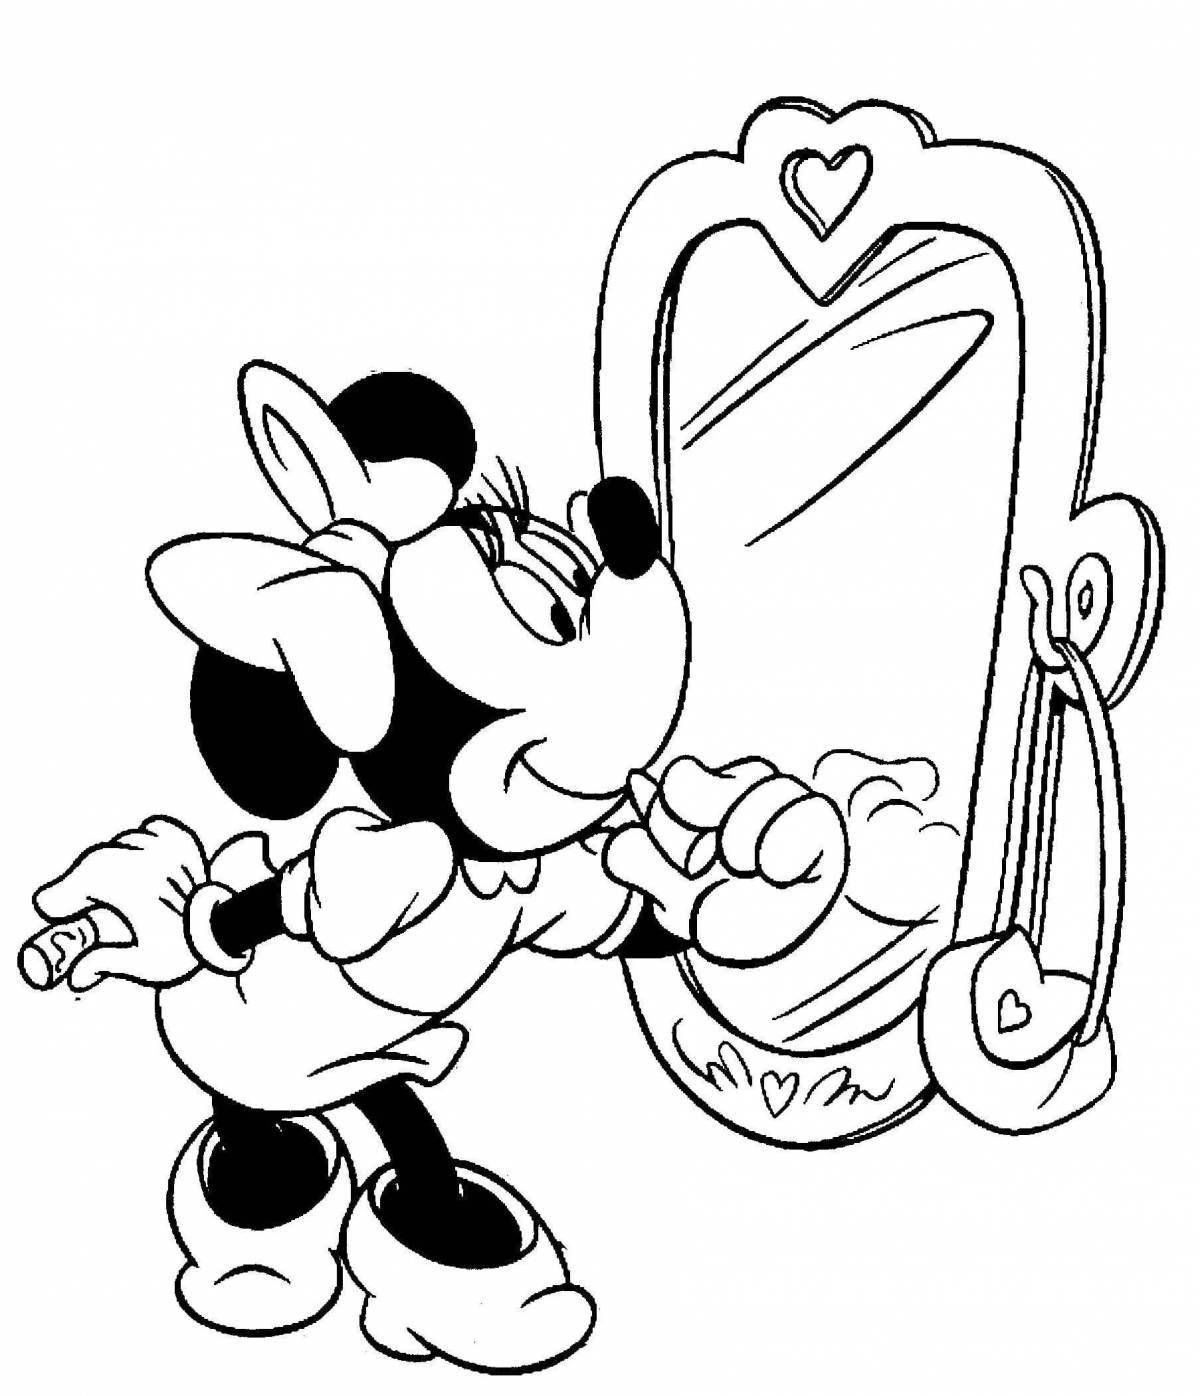 Witty mickey mouse coloring book